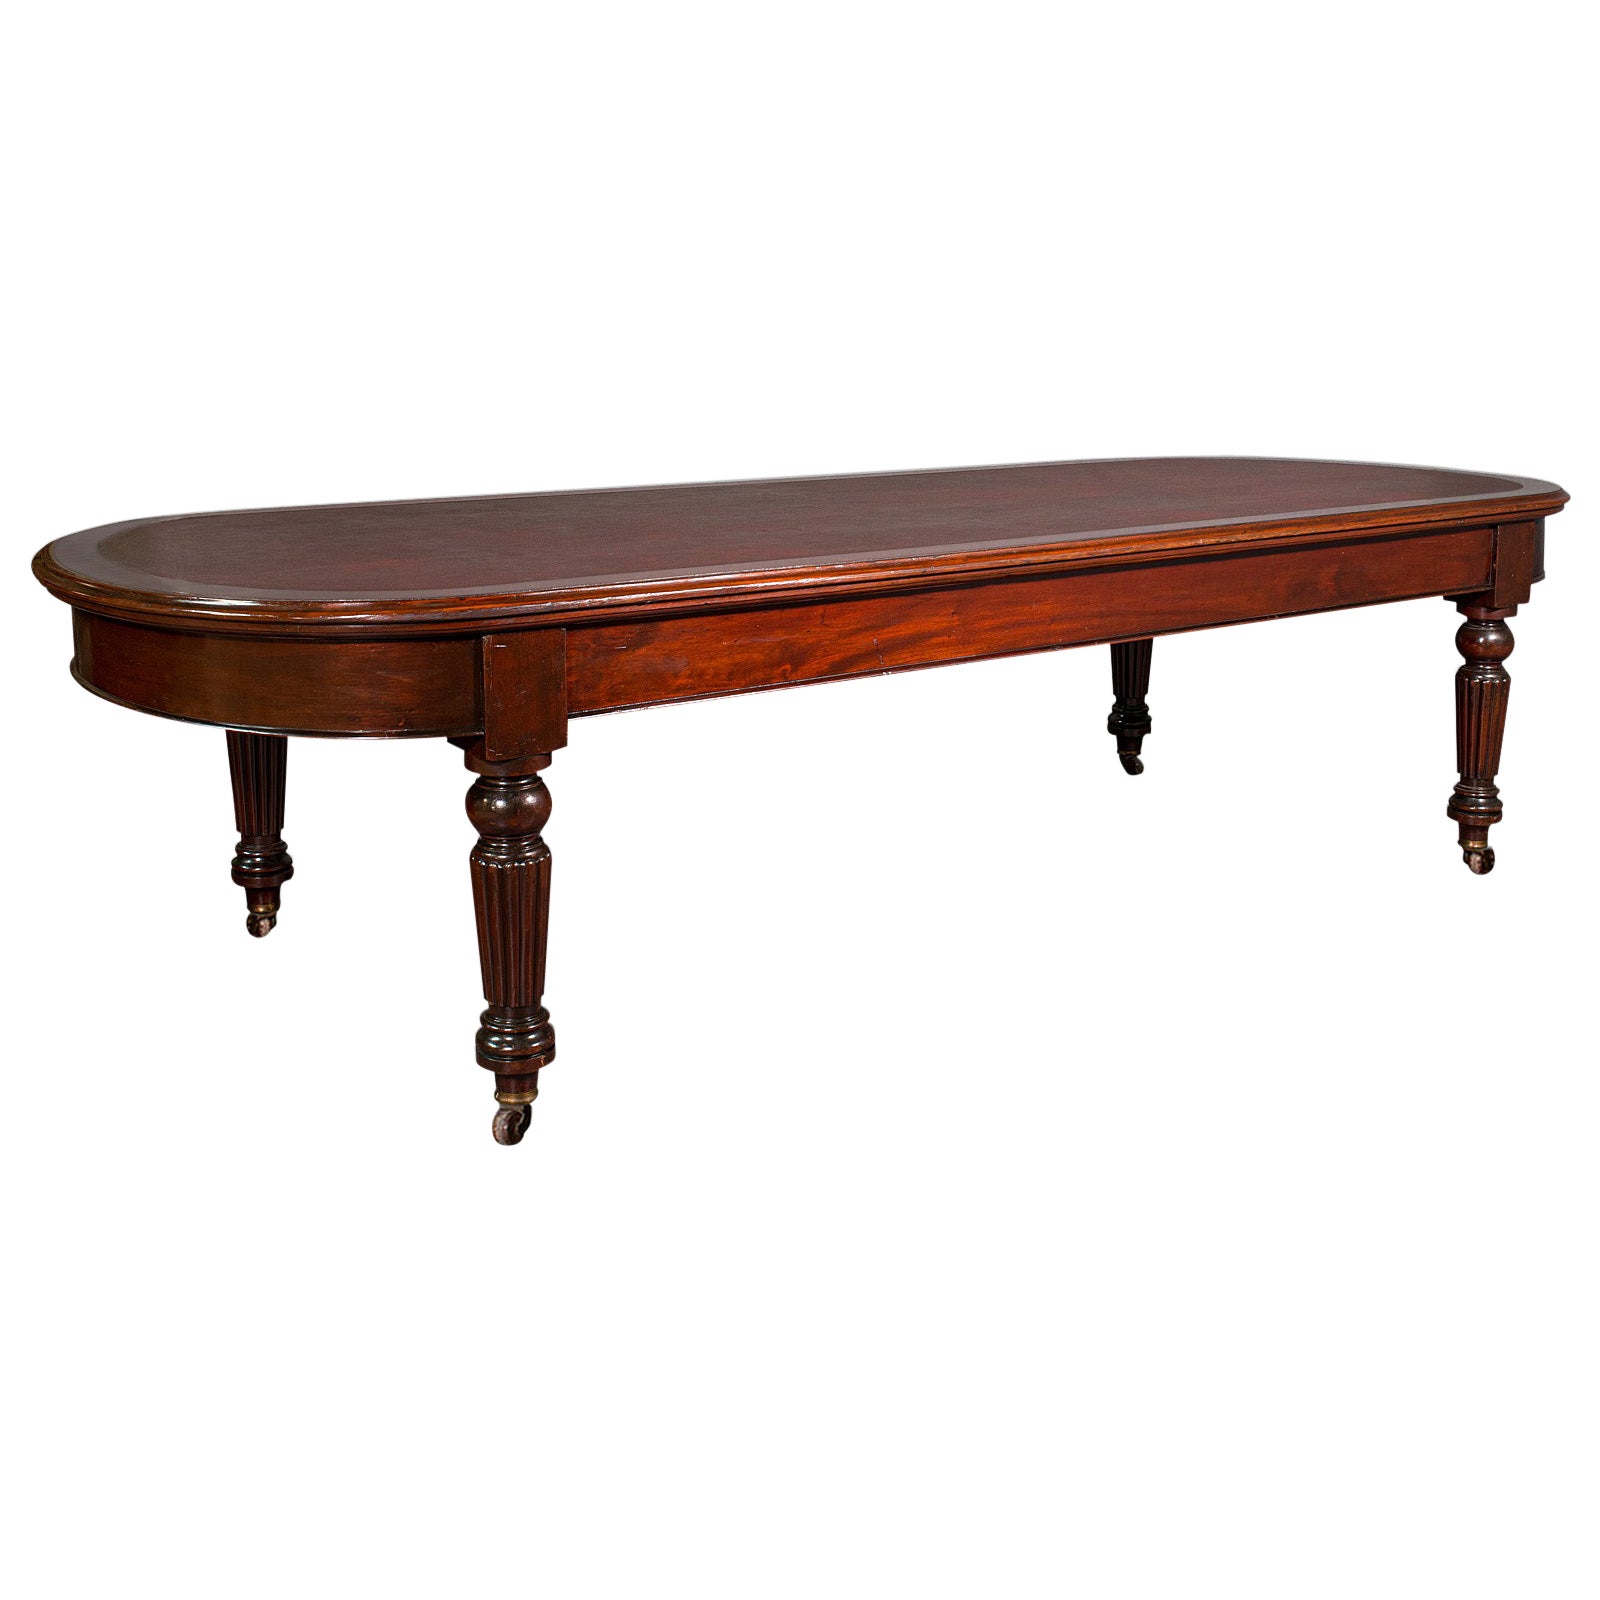 Large 8 Seat Antique Library Table, Mahogany, Boardroom, Dining, Victorian, 1850